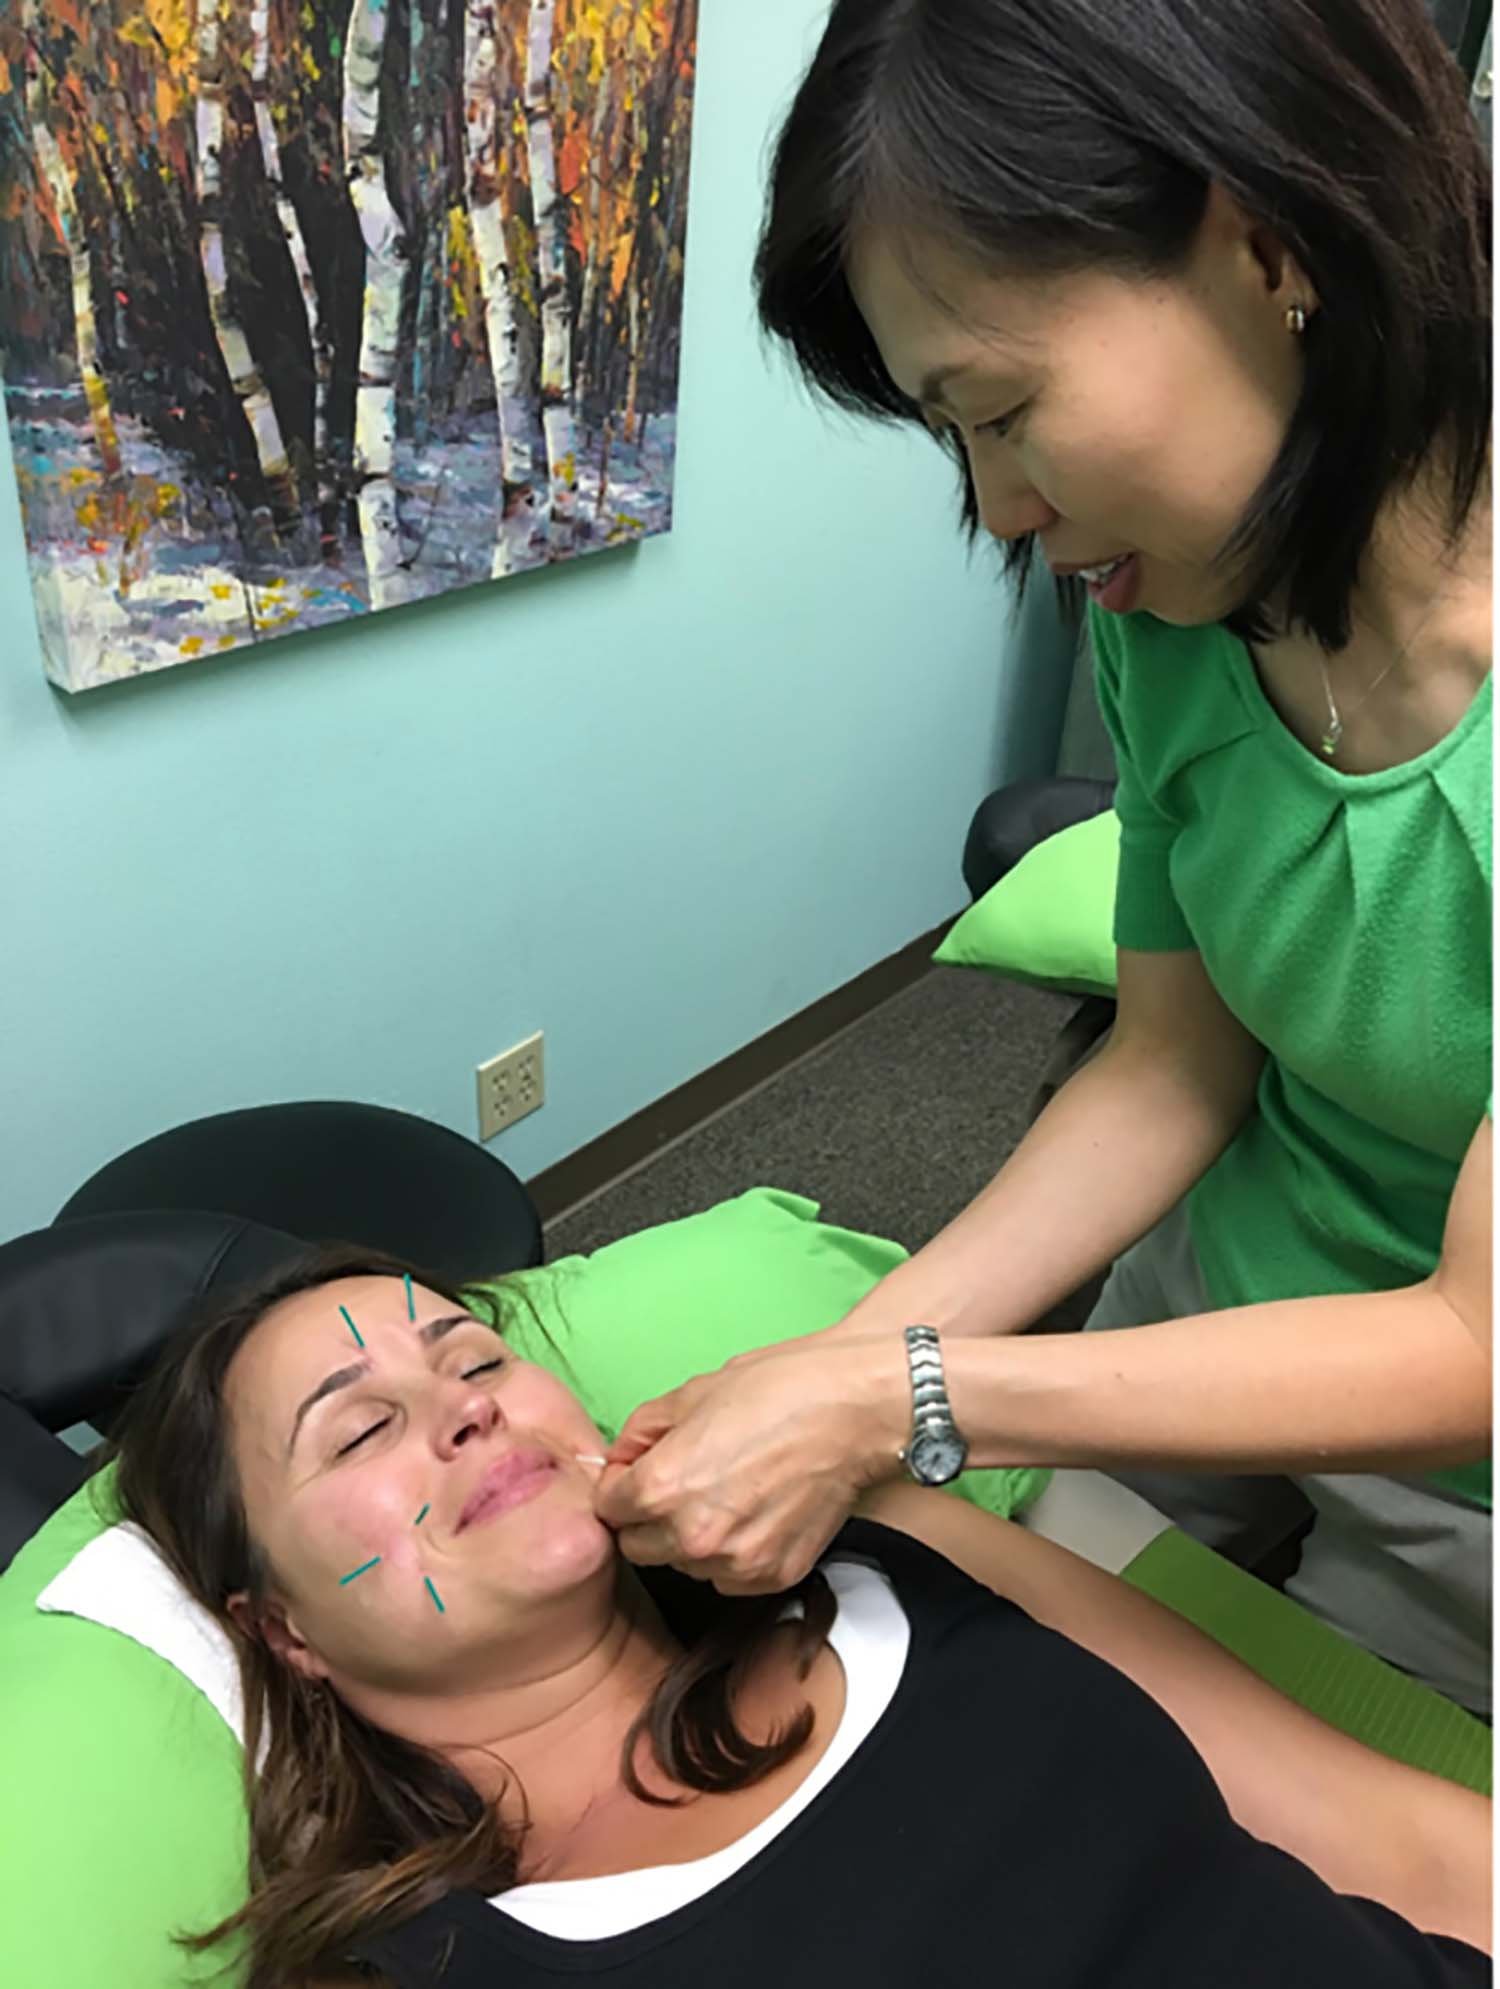 Dr. Iong Performing Facial Acupuncture on a Patient